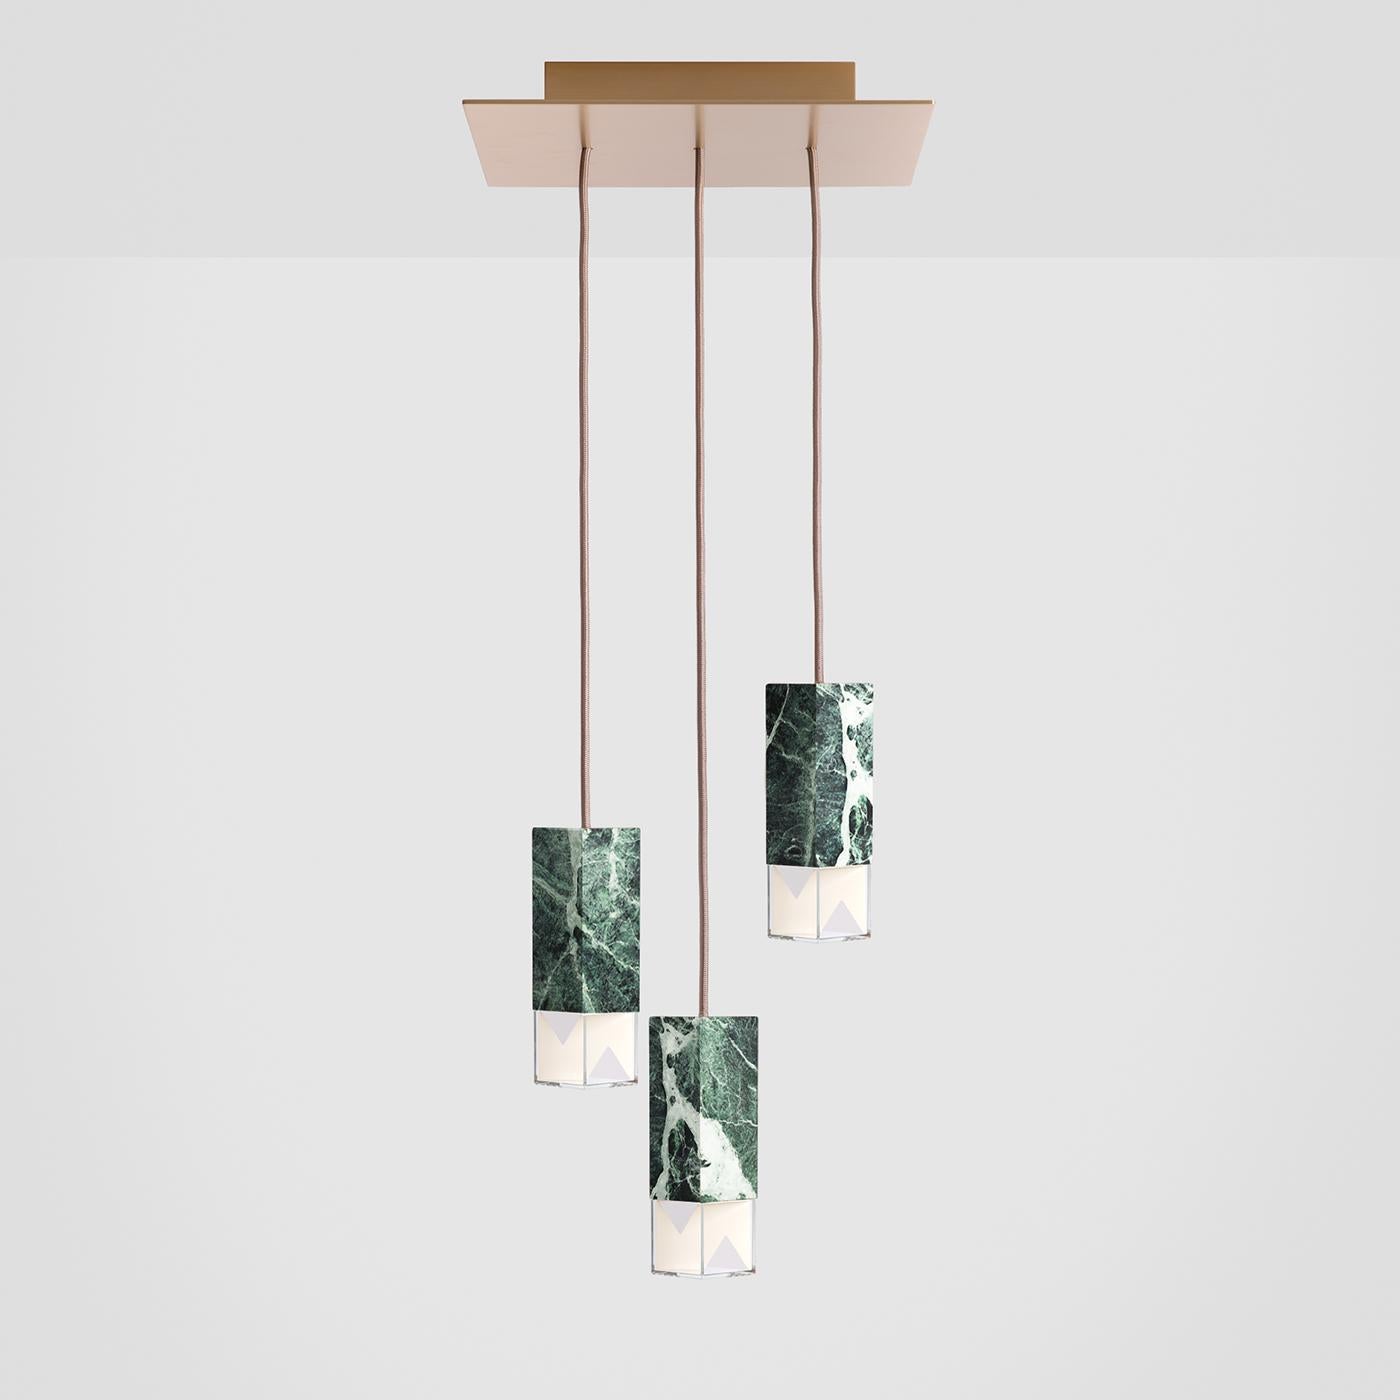 Part of Formaminima “Colour Edition”, in this superb 3-Light chandelier the Green Alpes marble plays the main role. Its distinctive character comes from the heart of Western Alpes at 1.800m of altitude, in Val D’Aosta region. The dramatic contrasts